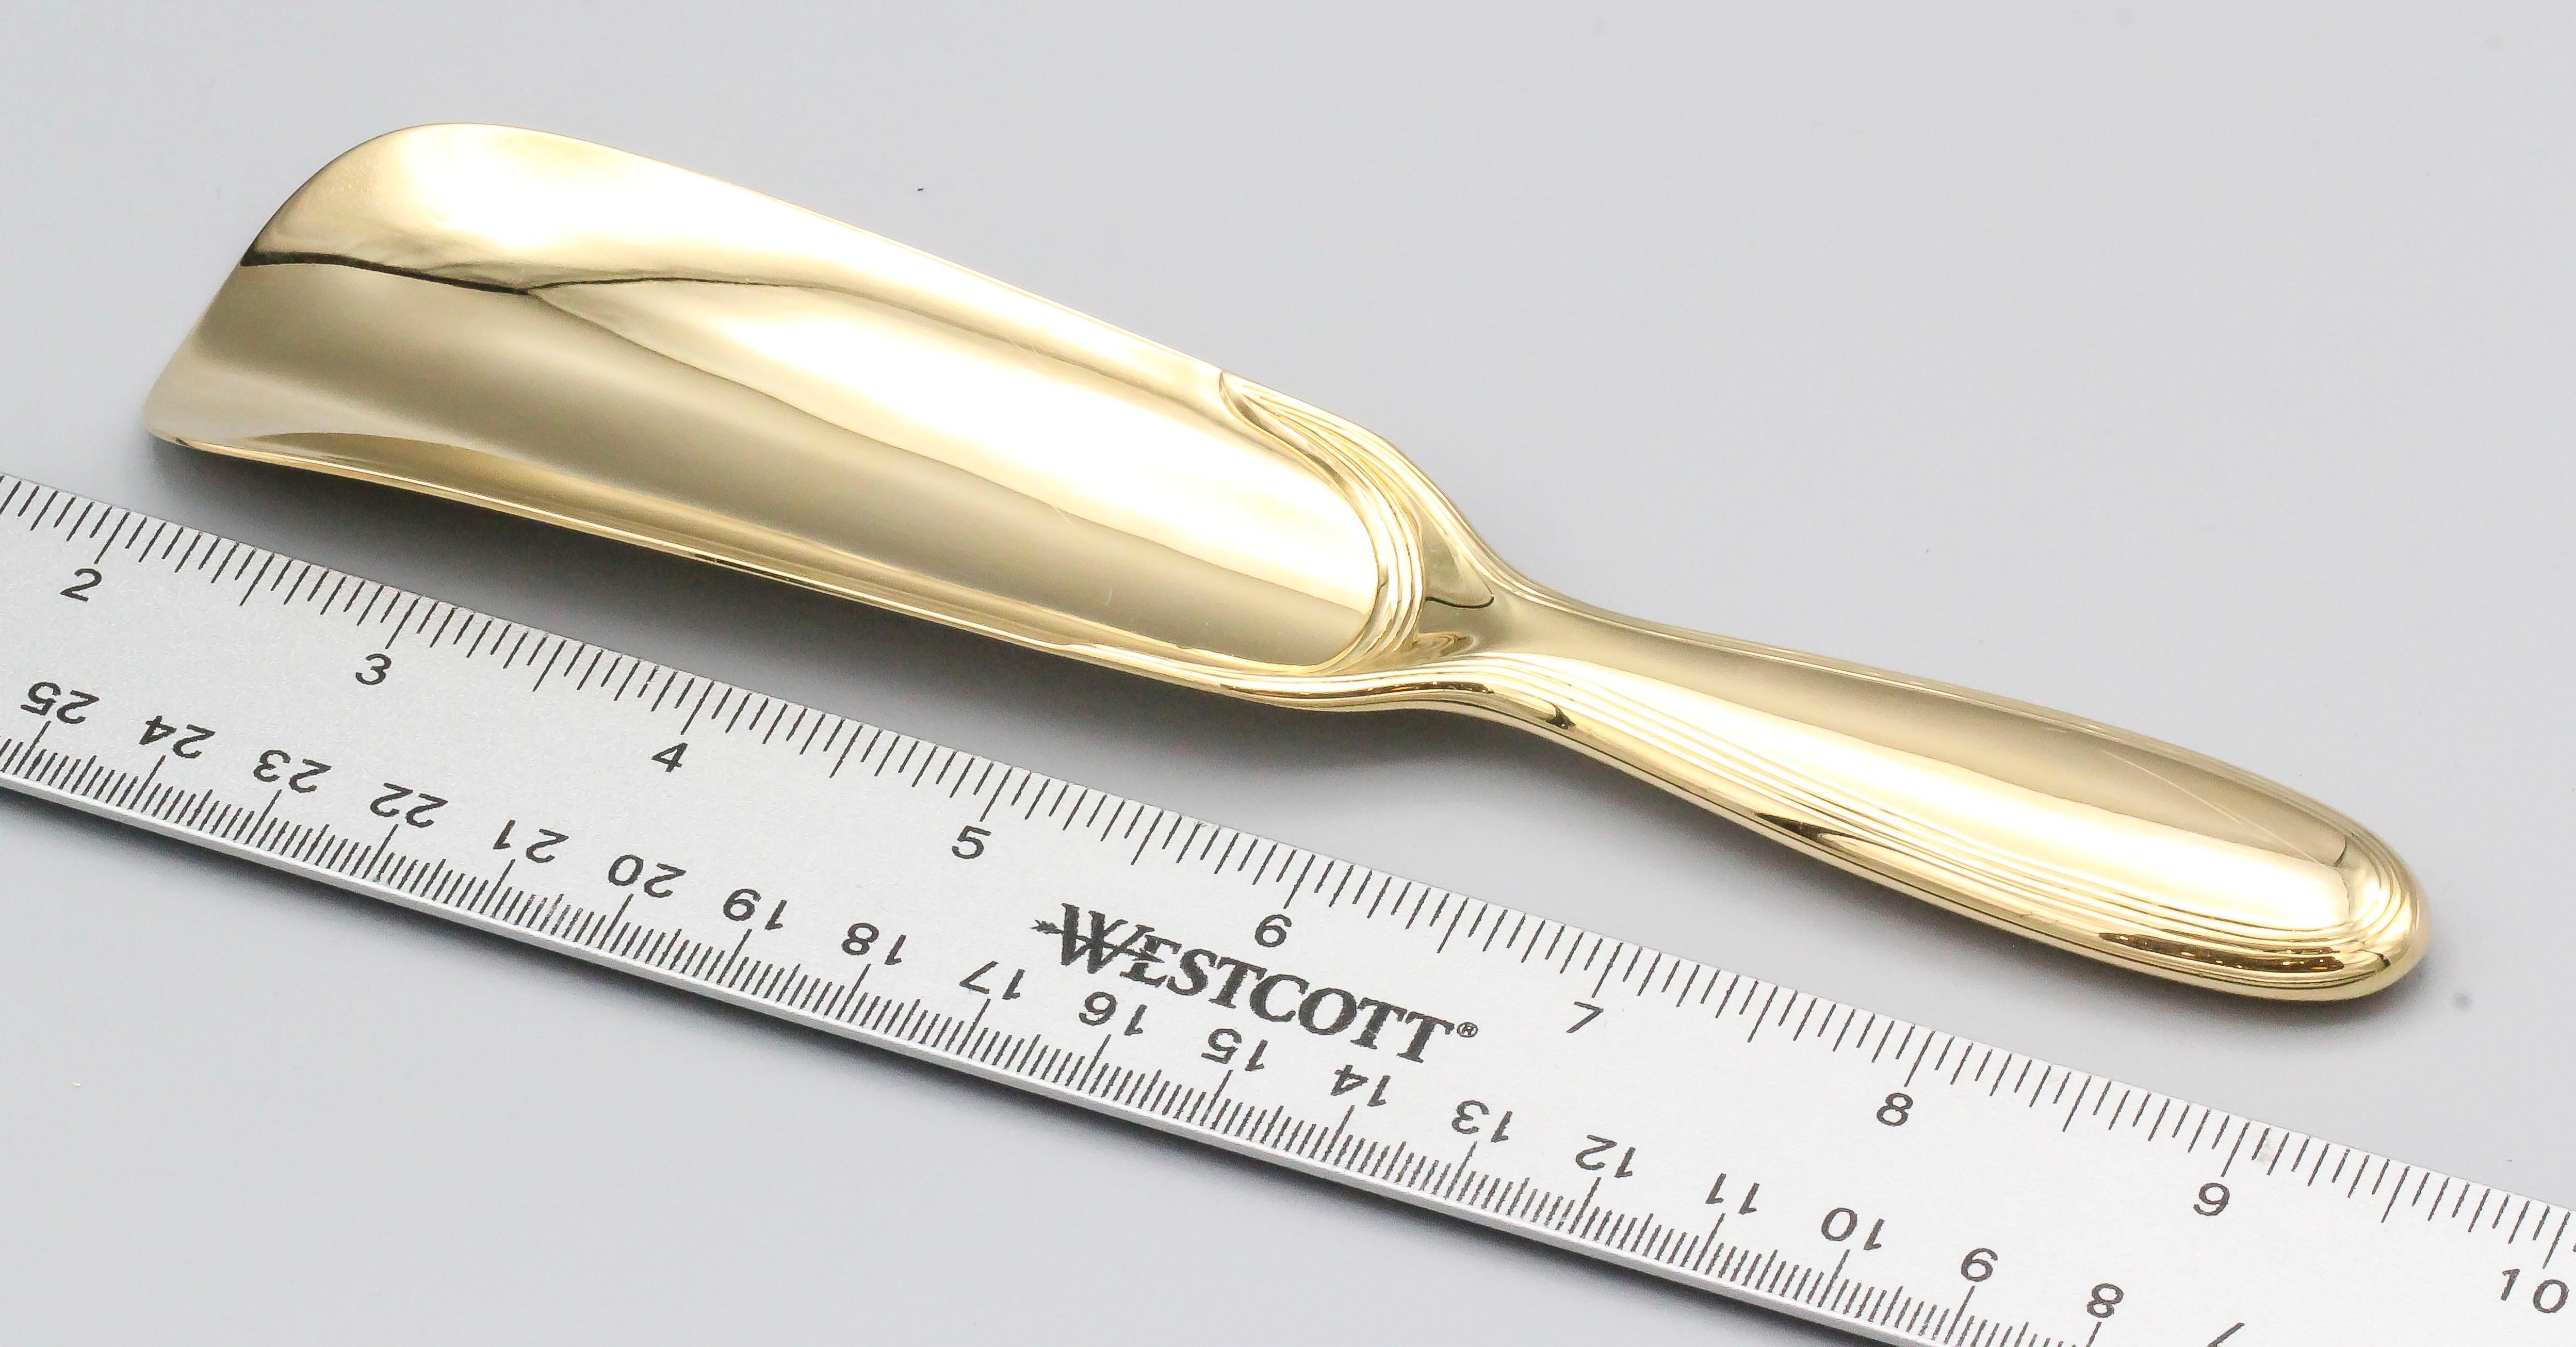 Rare solid 18K yellow gold shoehorn by Tiffany & Co.  circa 1940s.  Beautifully made and highly functional, a great gift for the modern affluent gentleman.

Hallmarks: Tiffany & Co. Makers, 18kt Gold, reference numbers, maker's mark.